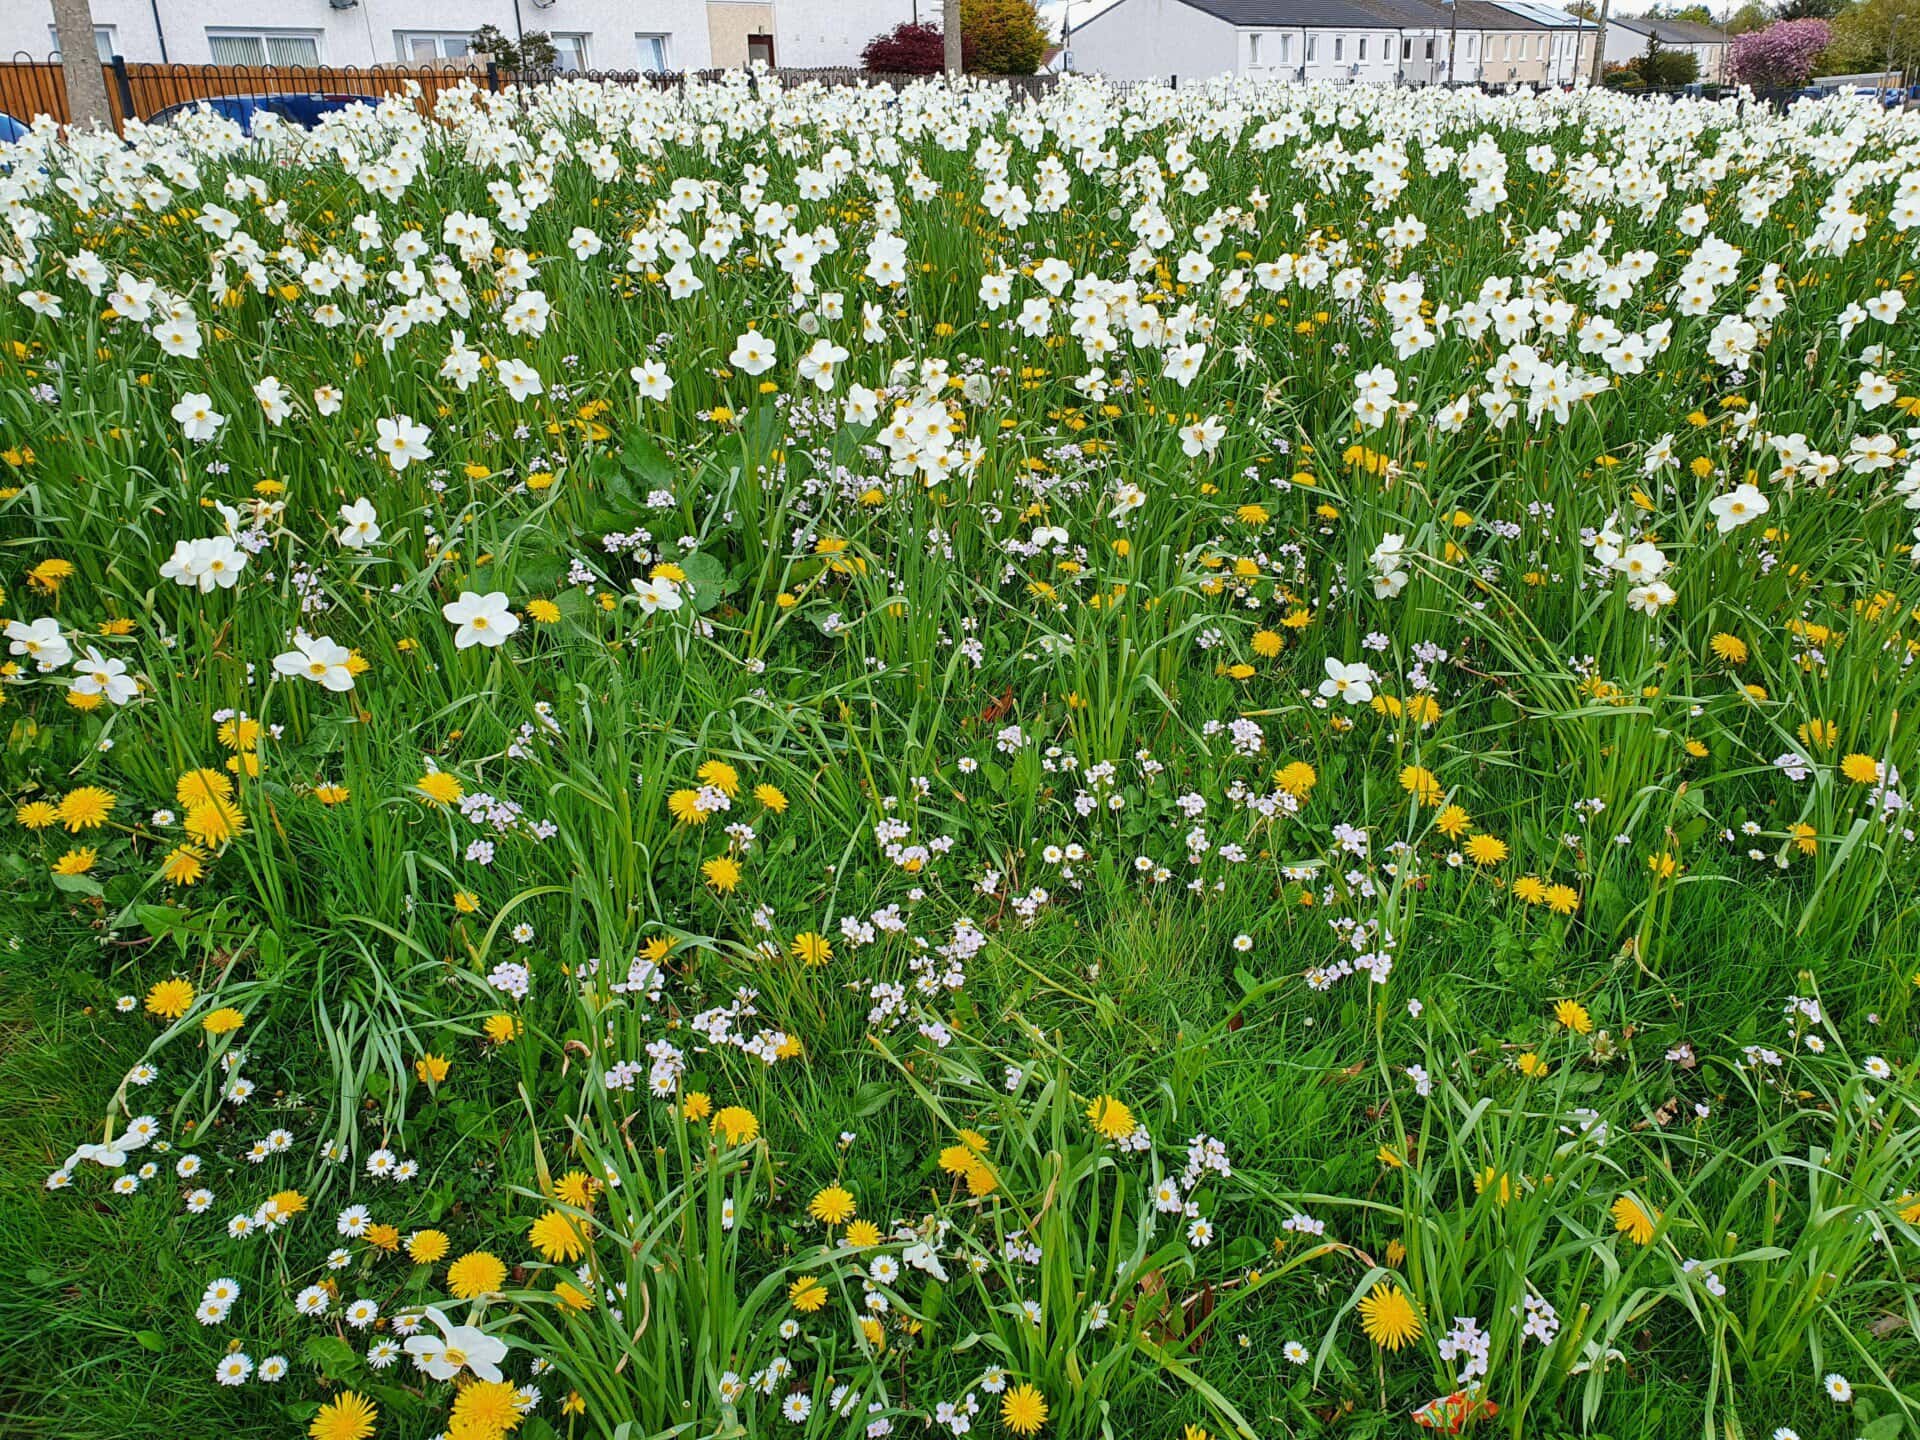 Close up of lots of white and yellow flowers in grass